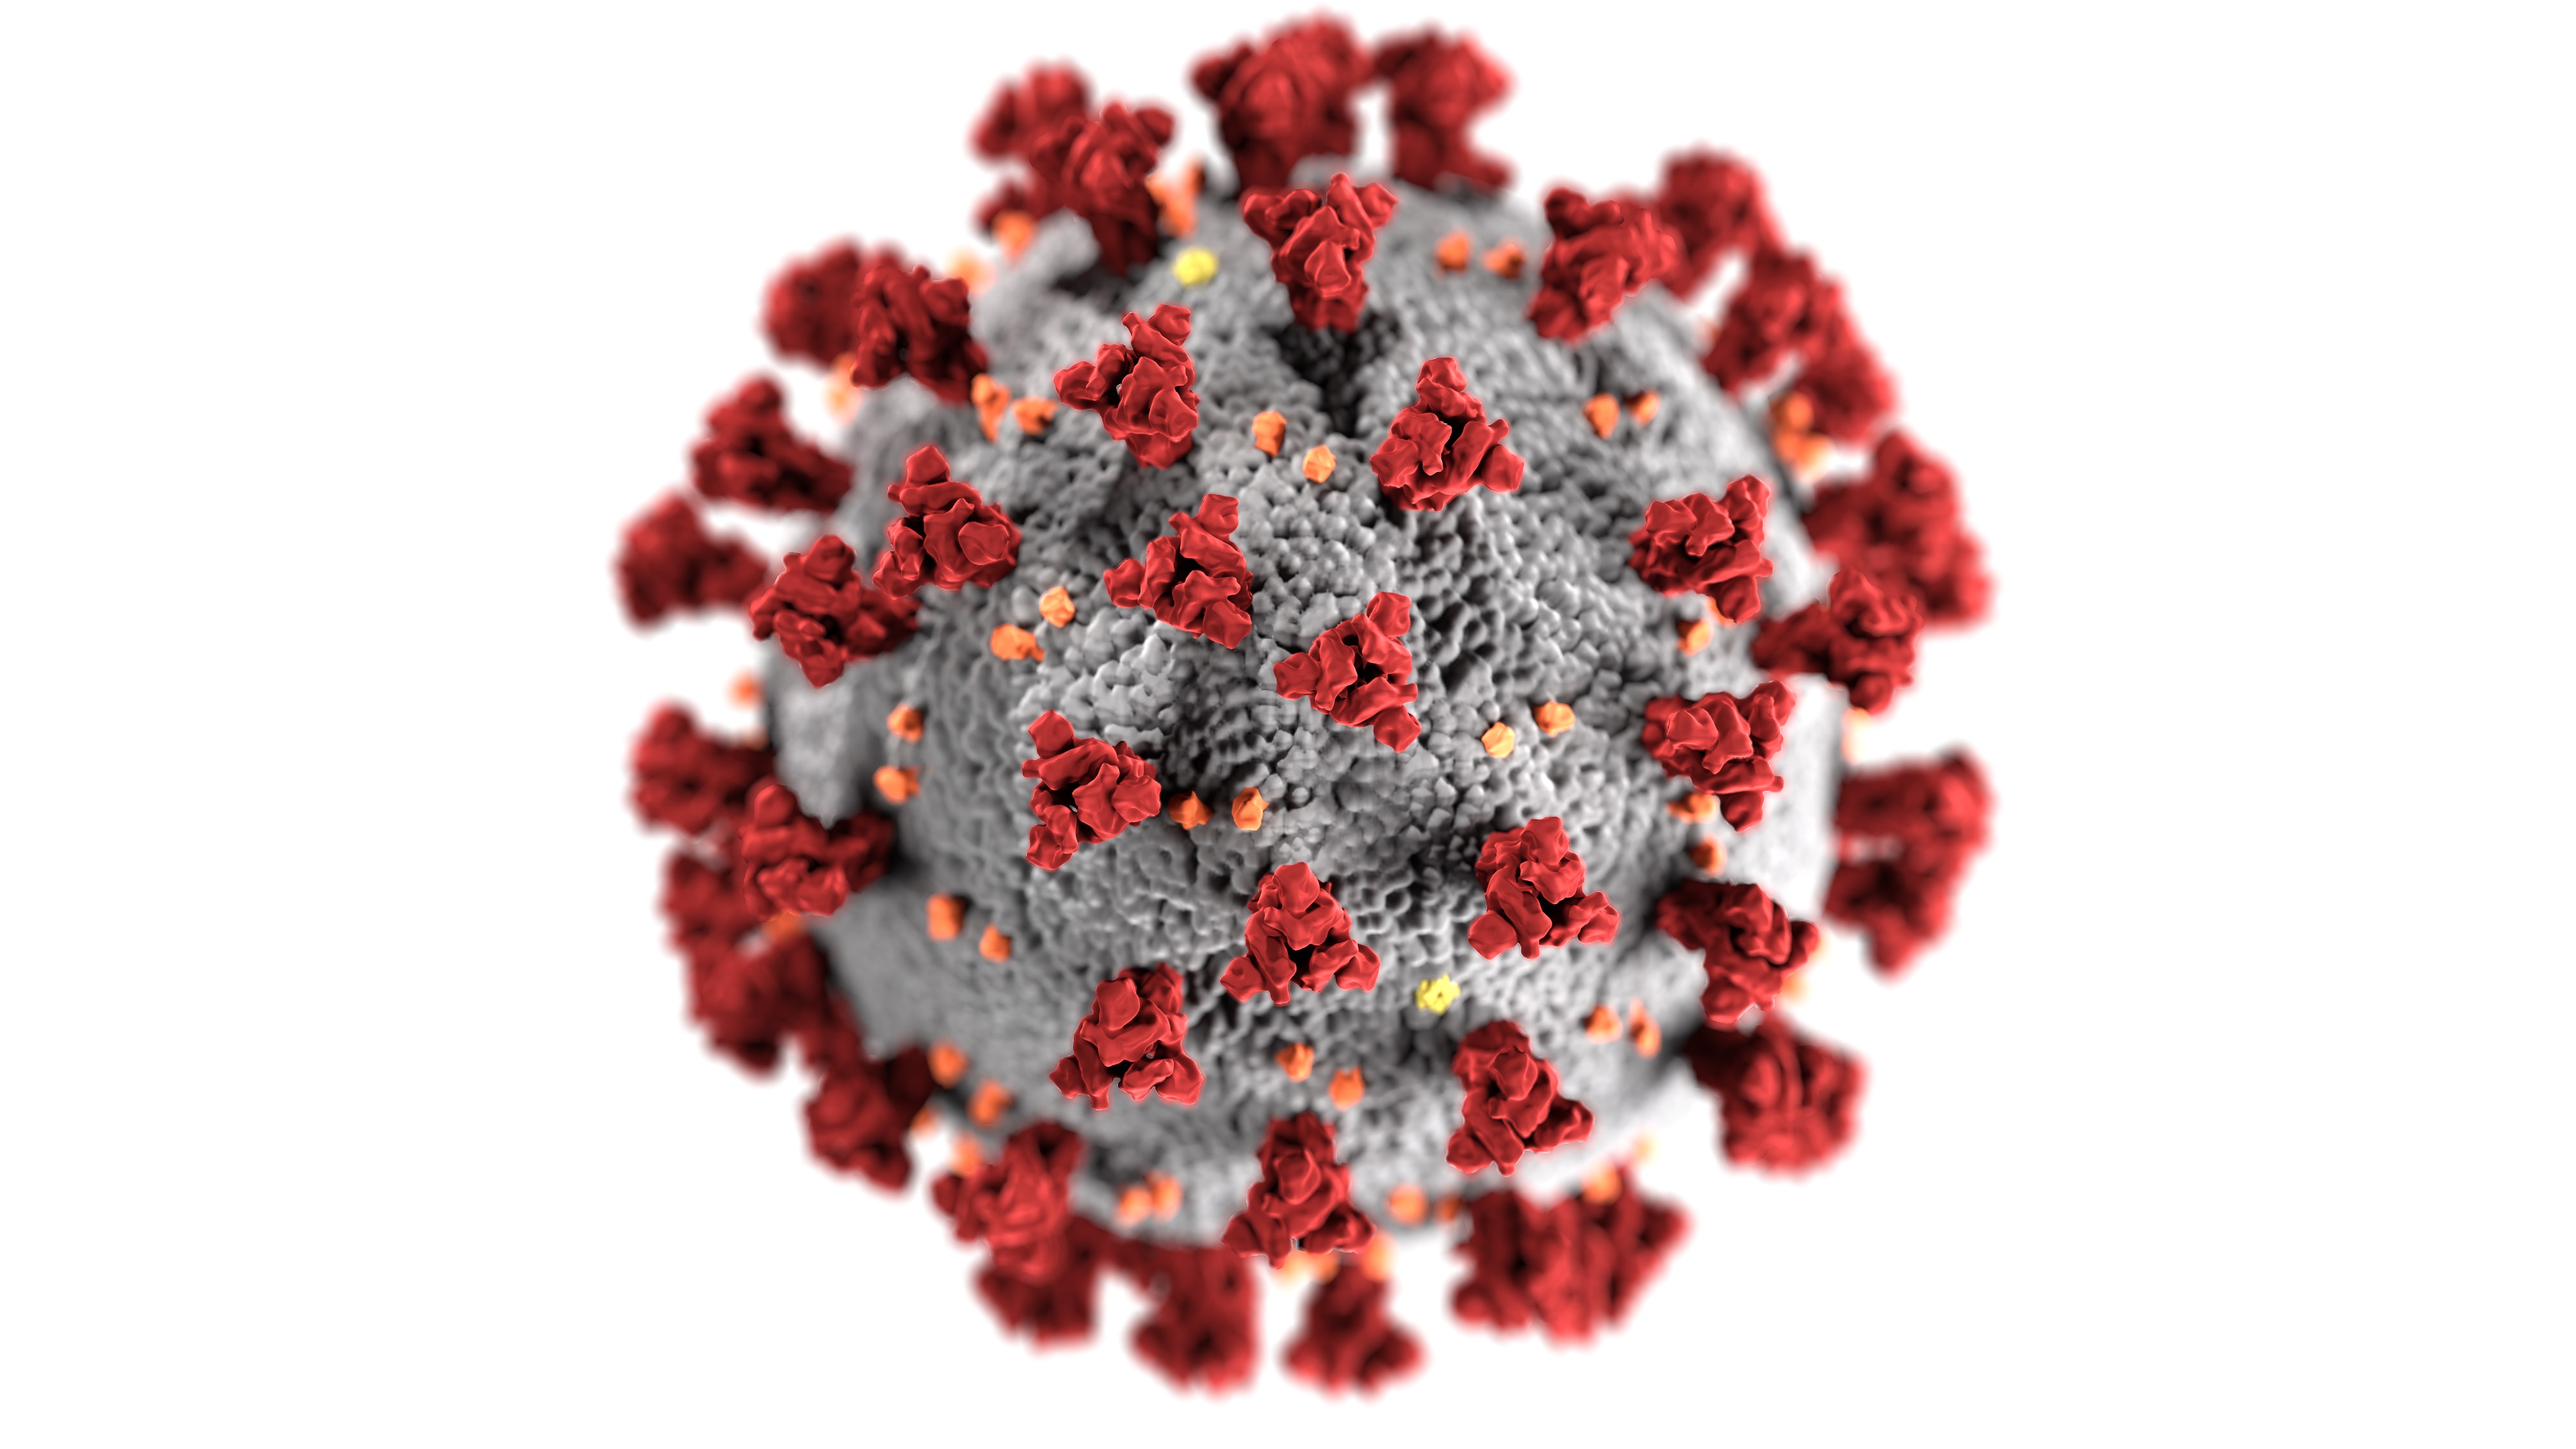 Image shows a picture of the Covid-19 virus under the microscope